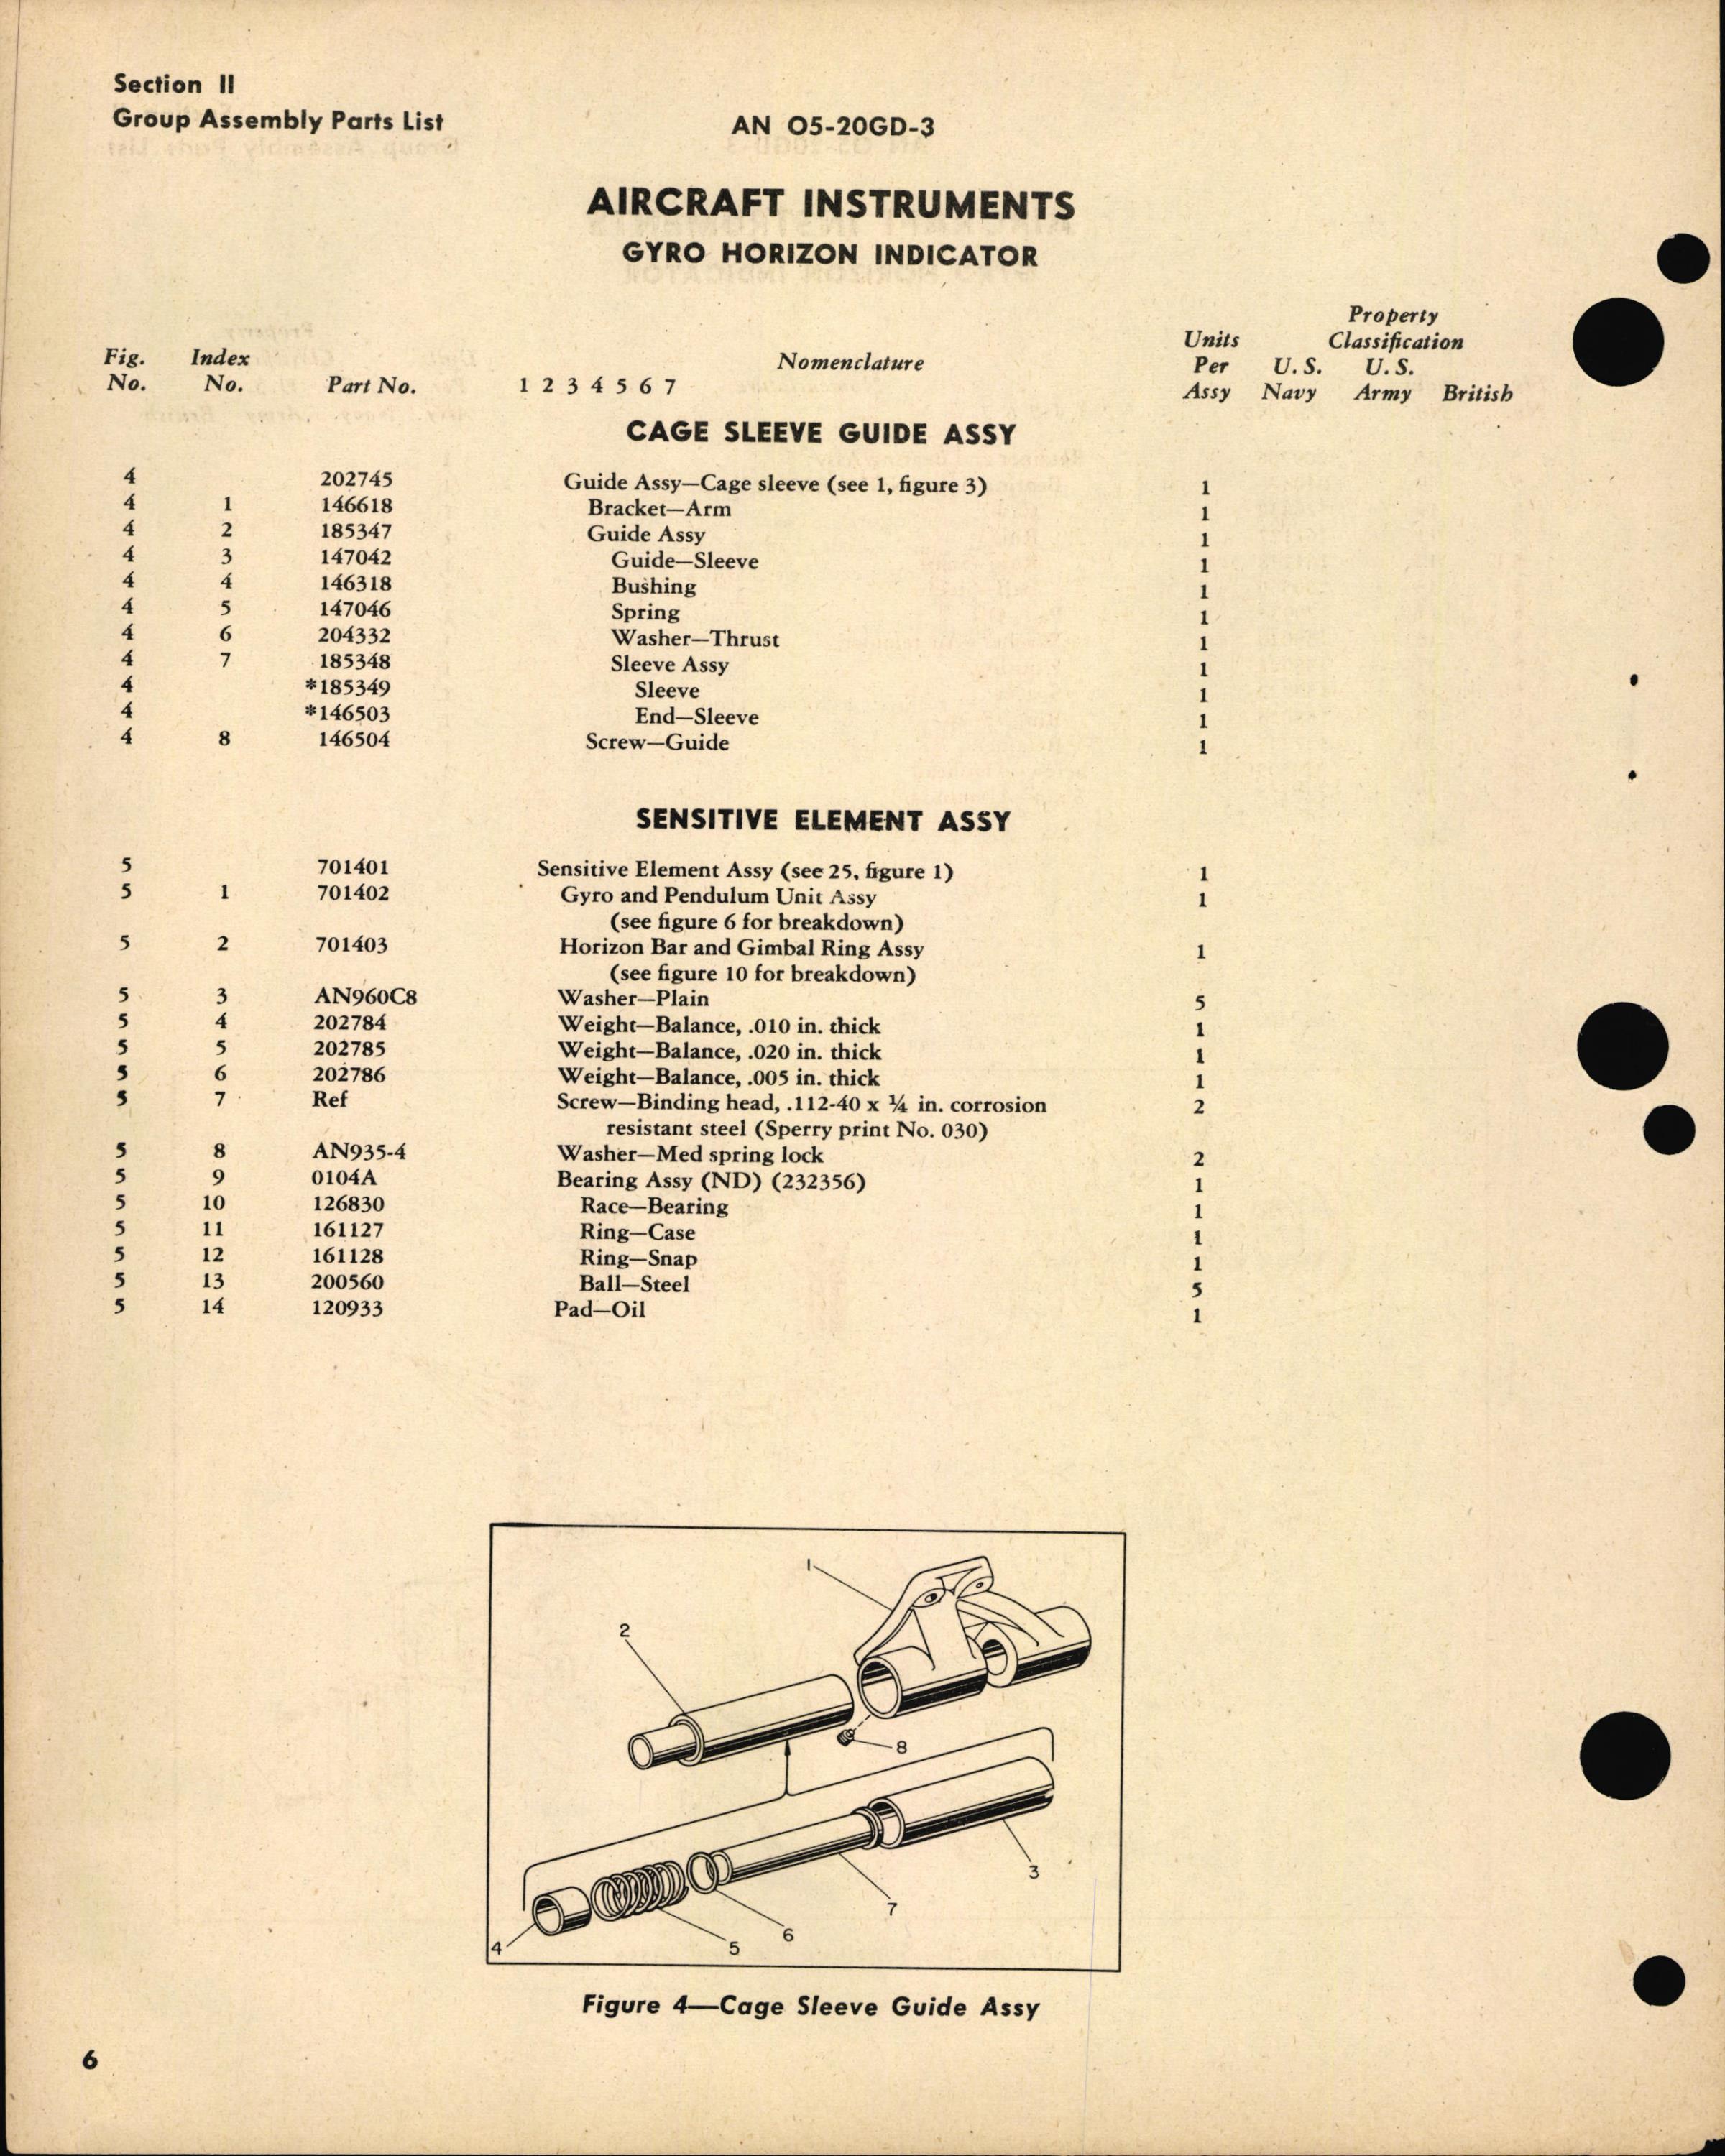 Sample page 10 from AirCorps Library document: Parts Catalog for Gyro Horizon Indicators Part No. 656768